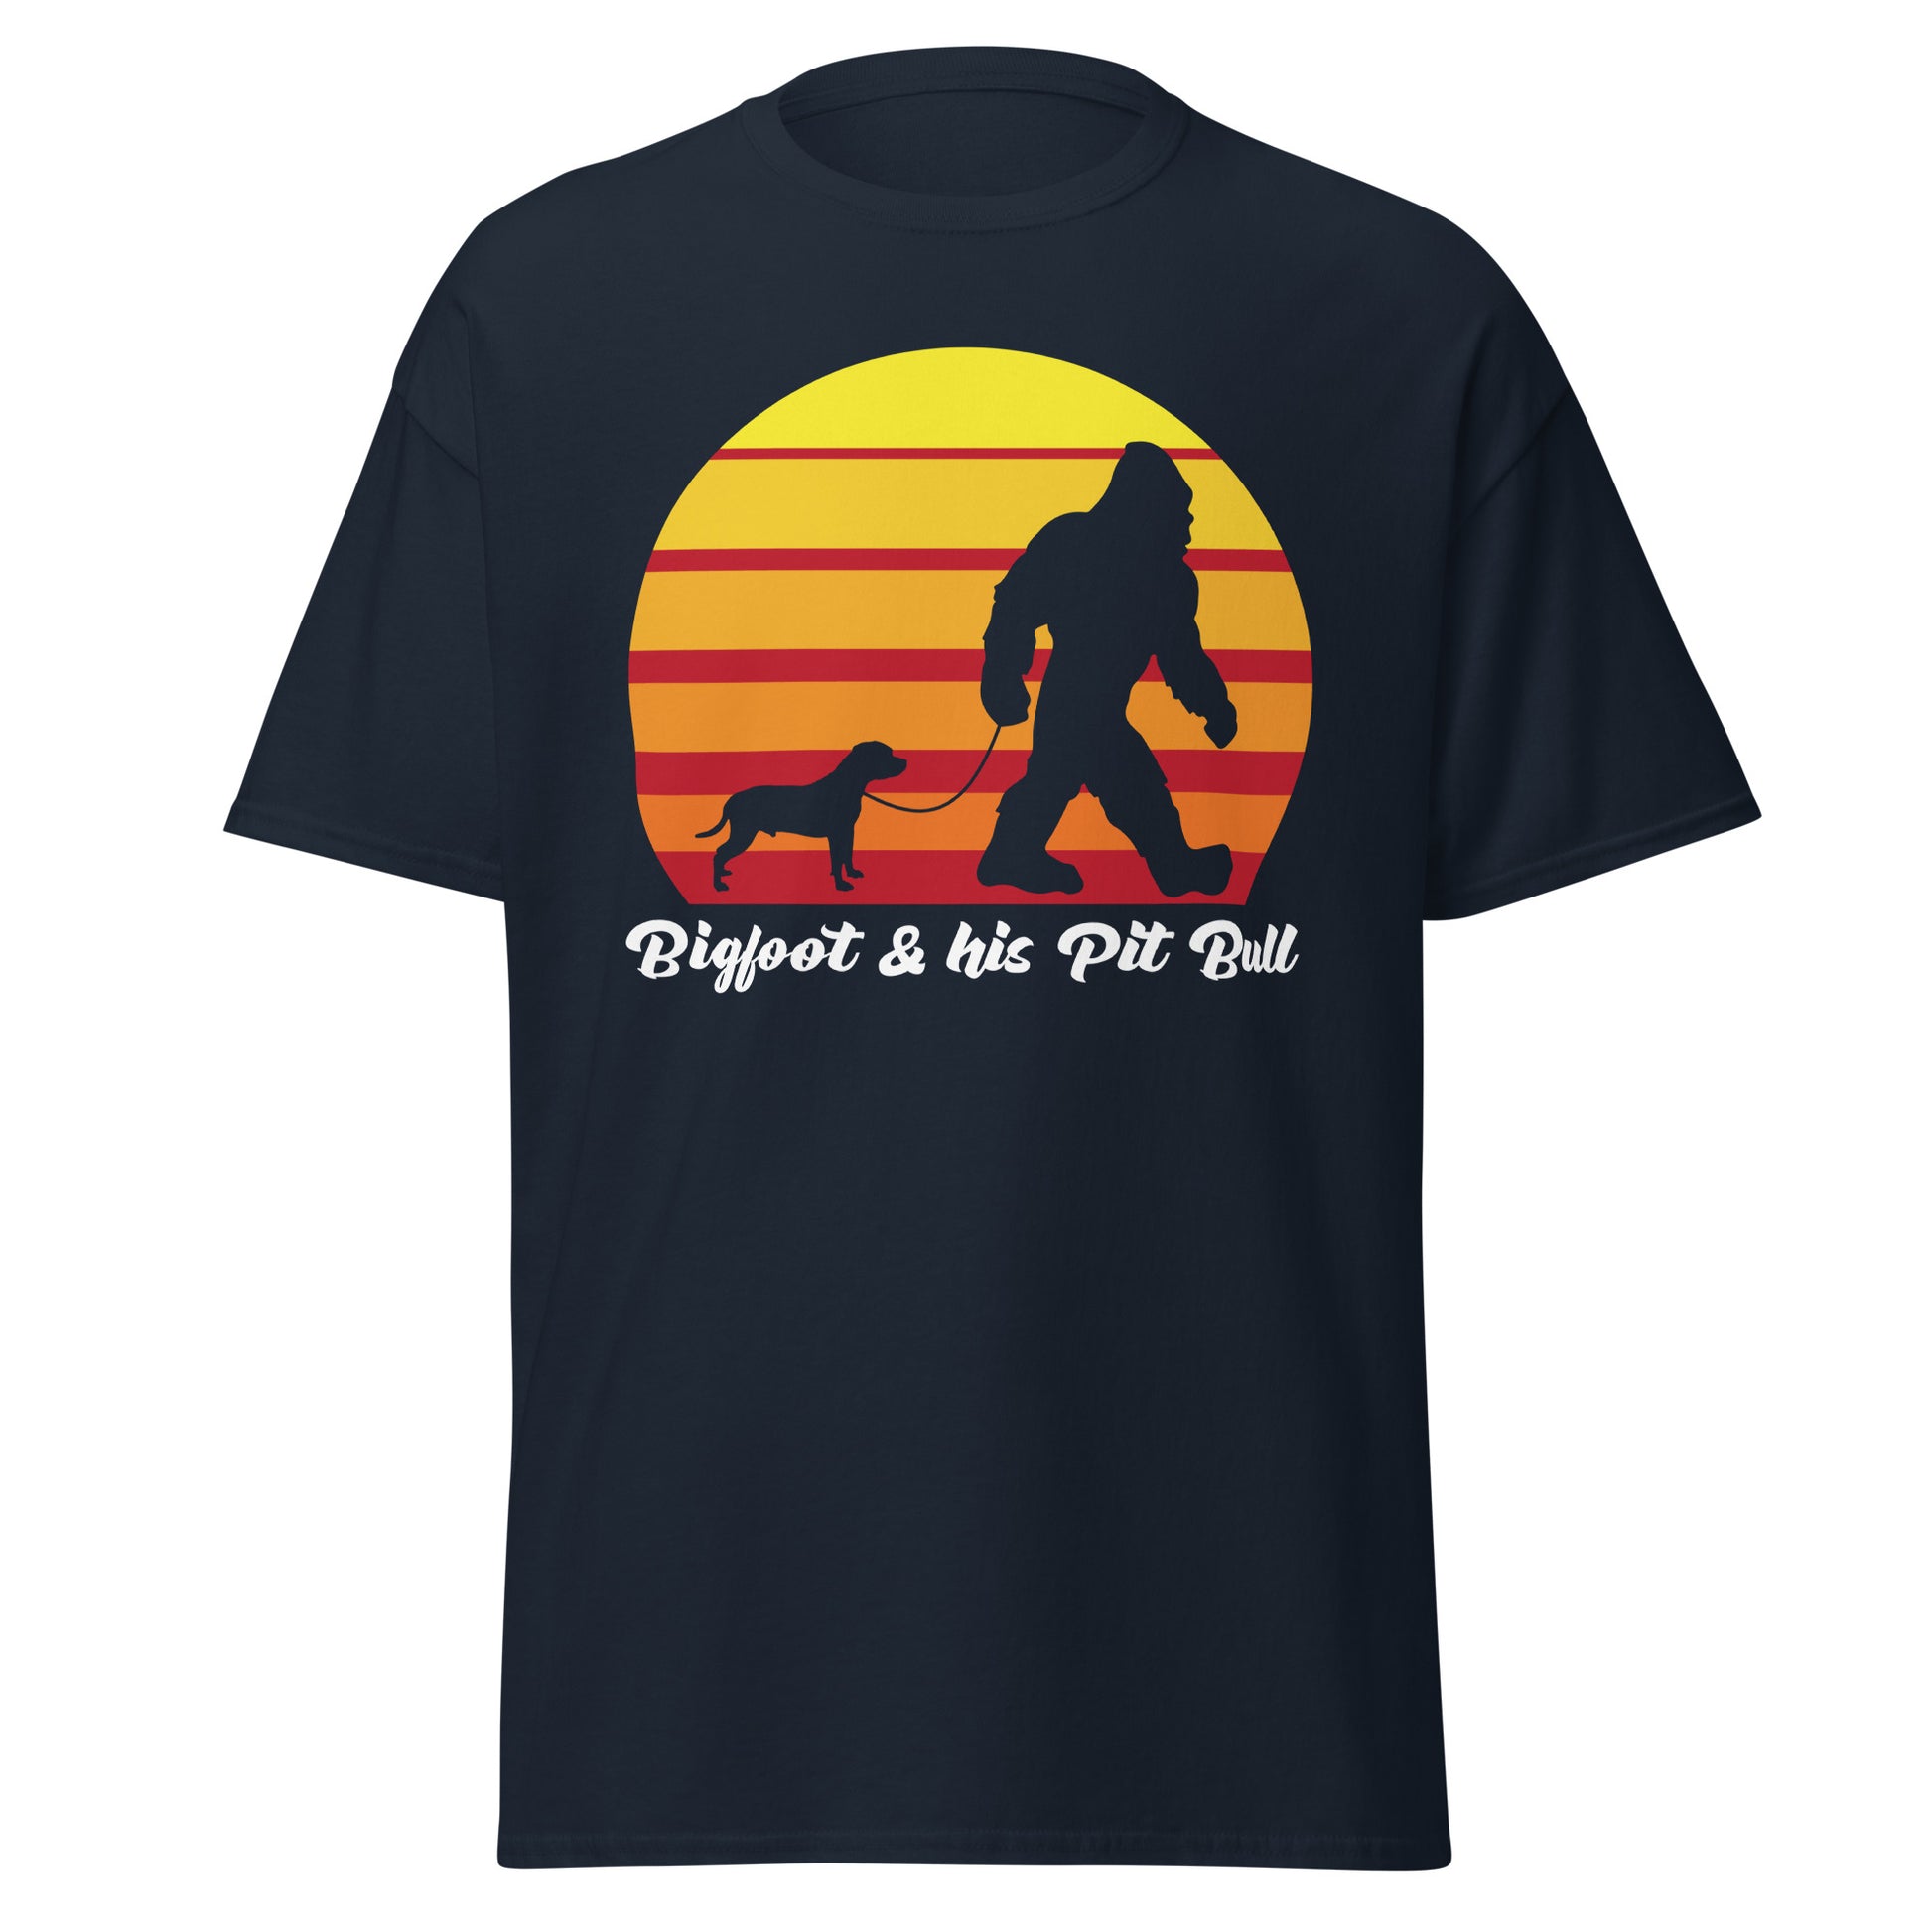 Bigfoot and his American Pit Bull men’s navy t-shirt by Dog Artistry.